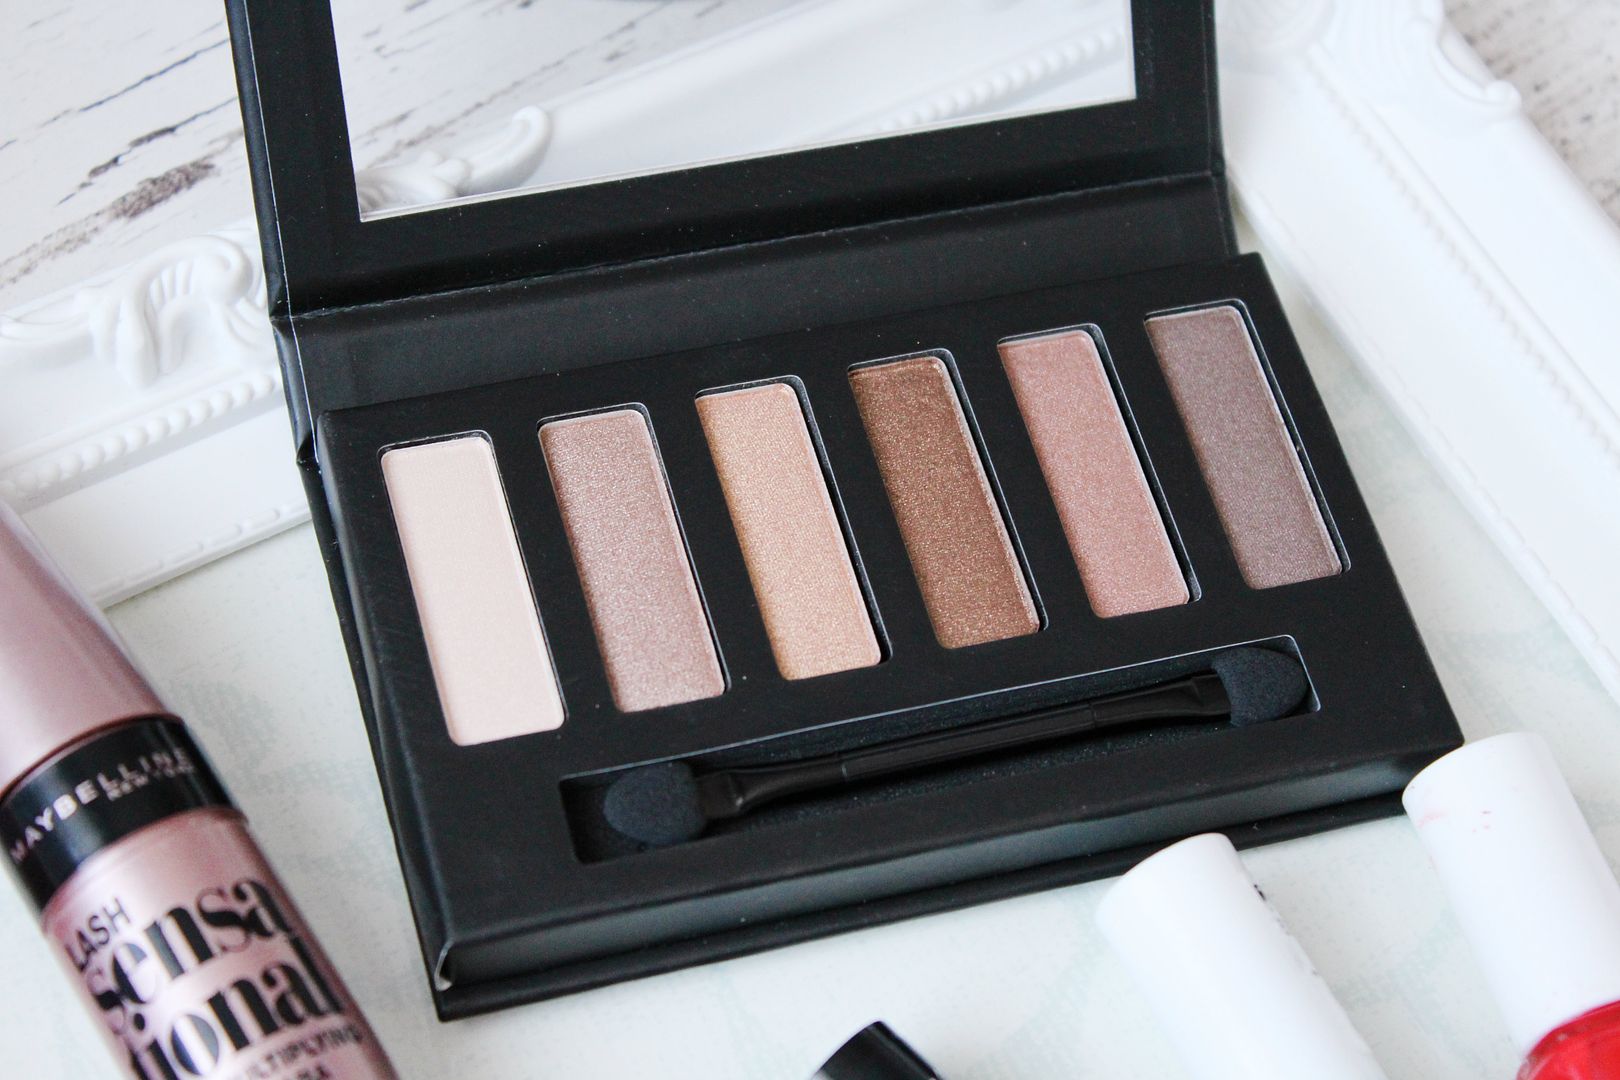 Boots-Spring-Summer-Makeup-Haul-2015-Collection-Eyes-Uncovered-Nude-Bronze-Palette-Belle-Amie-UK-Beauty-Fashion-Lifestyle-Blog